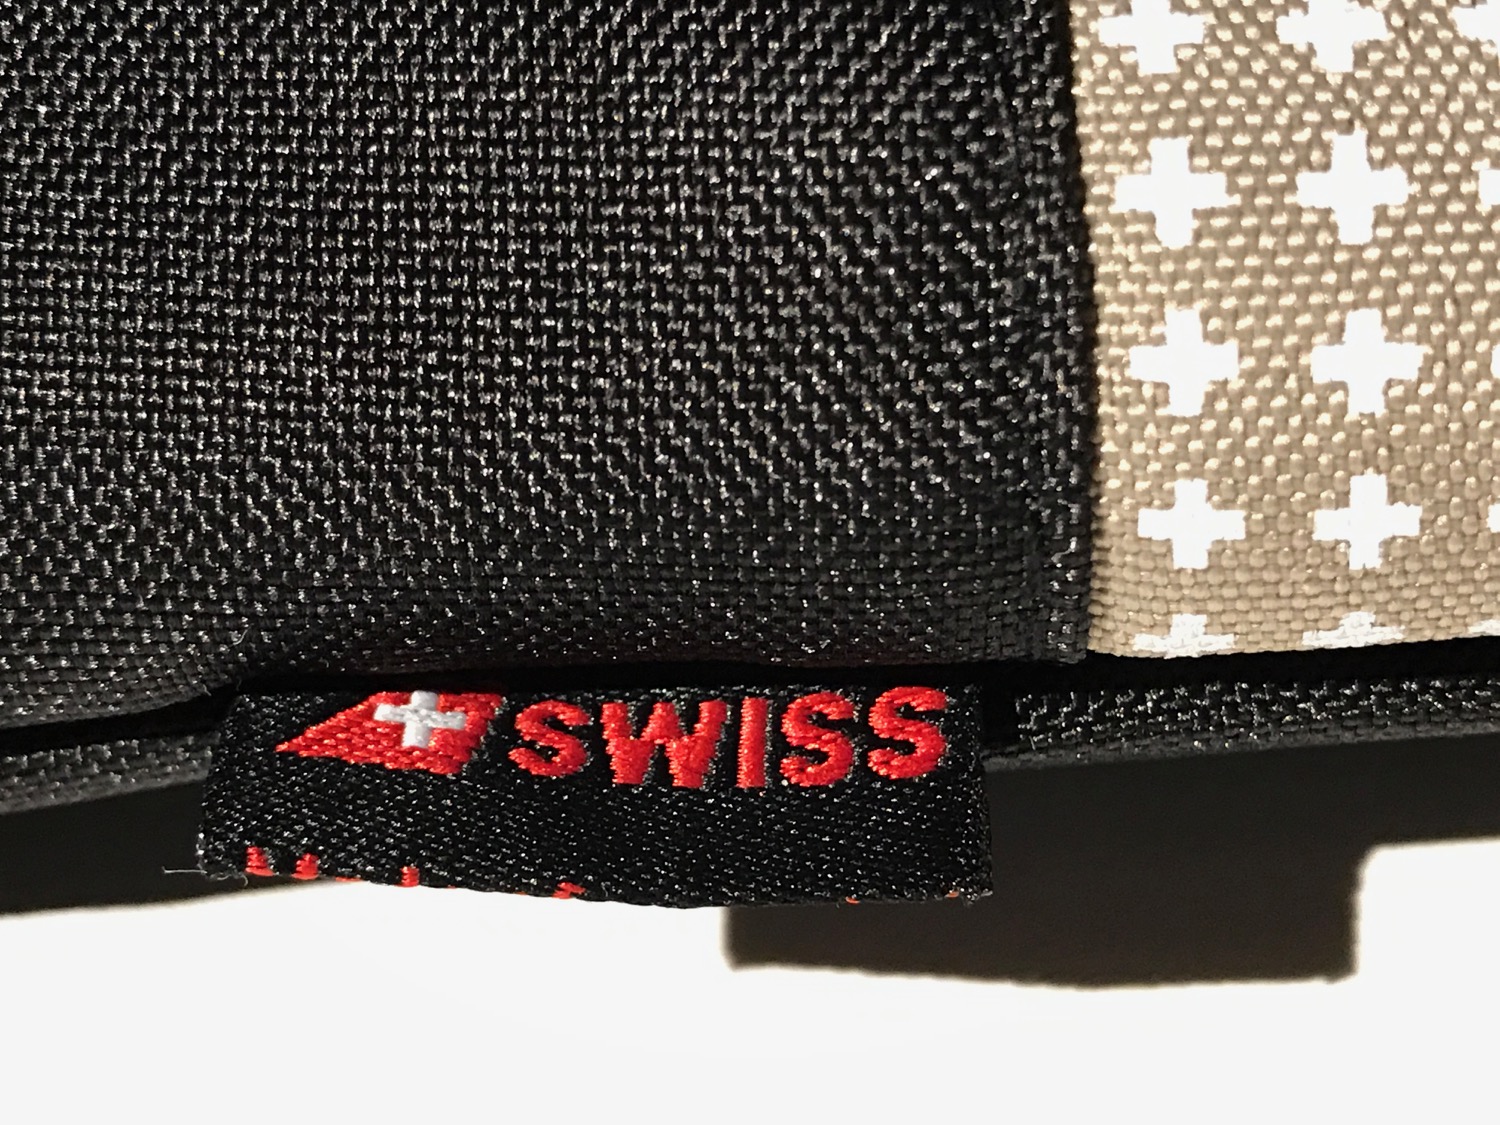 a close up of a black and tan fabric with a red and white logo